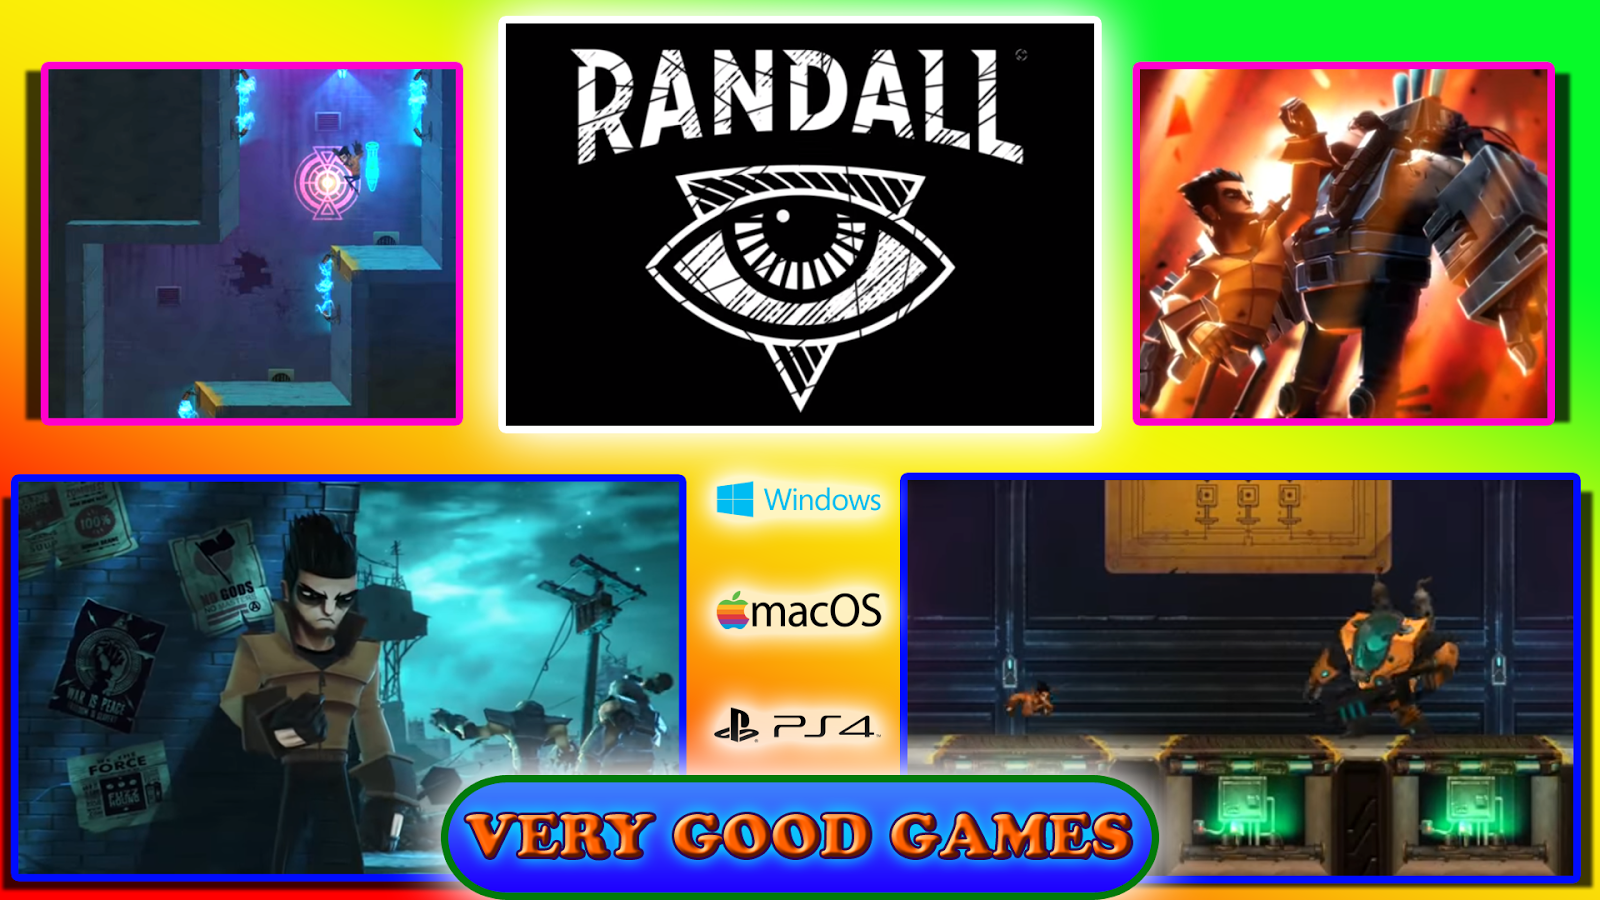 A banner with screenshots from Randall - an action game for PlayStation 4 game consoles, for Windows and Apple computers